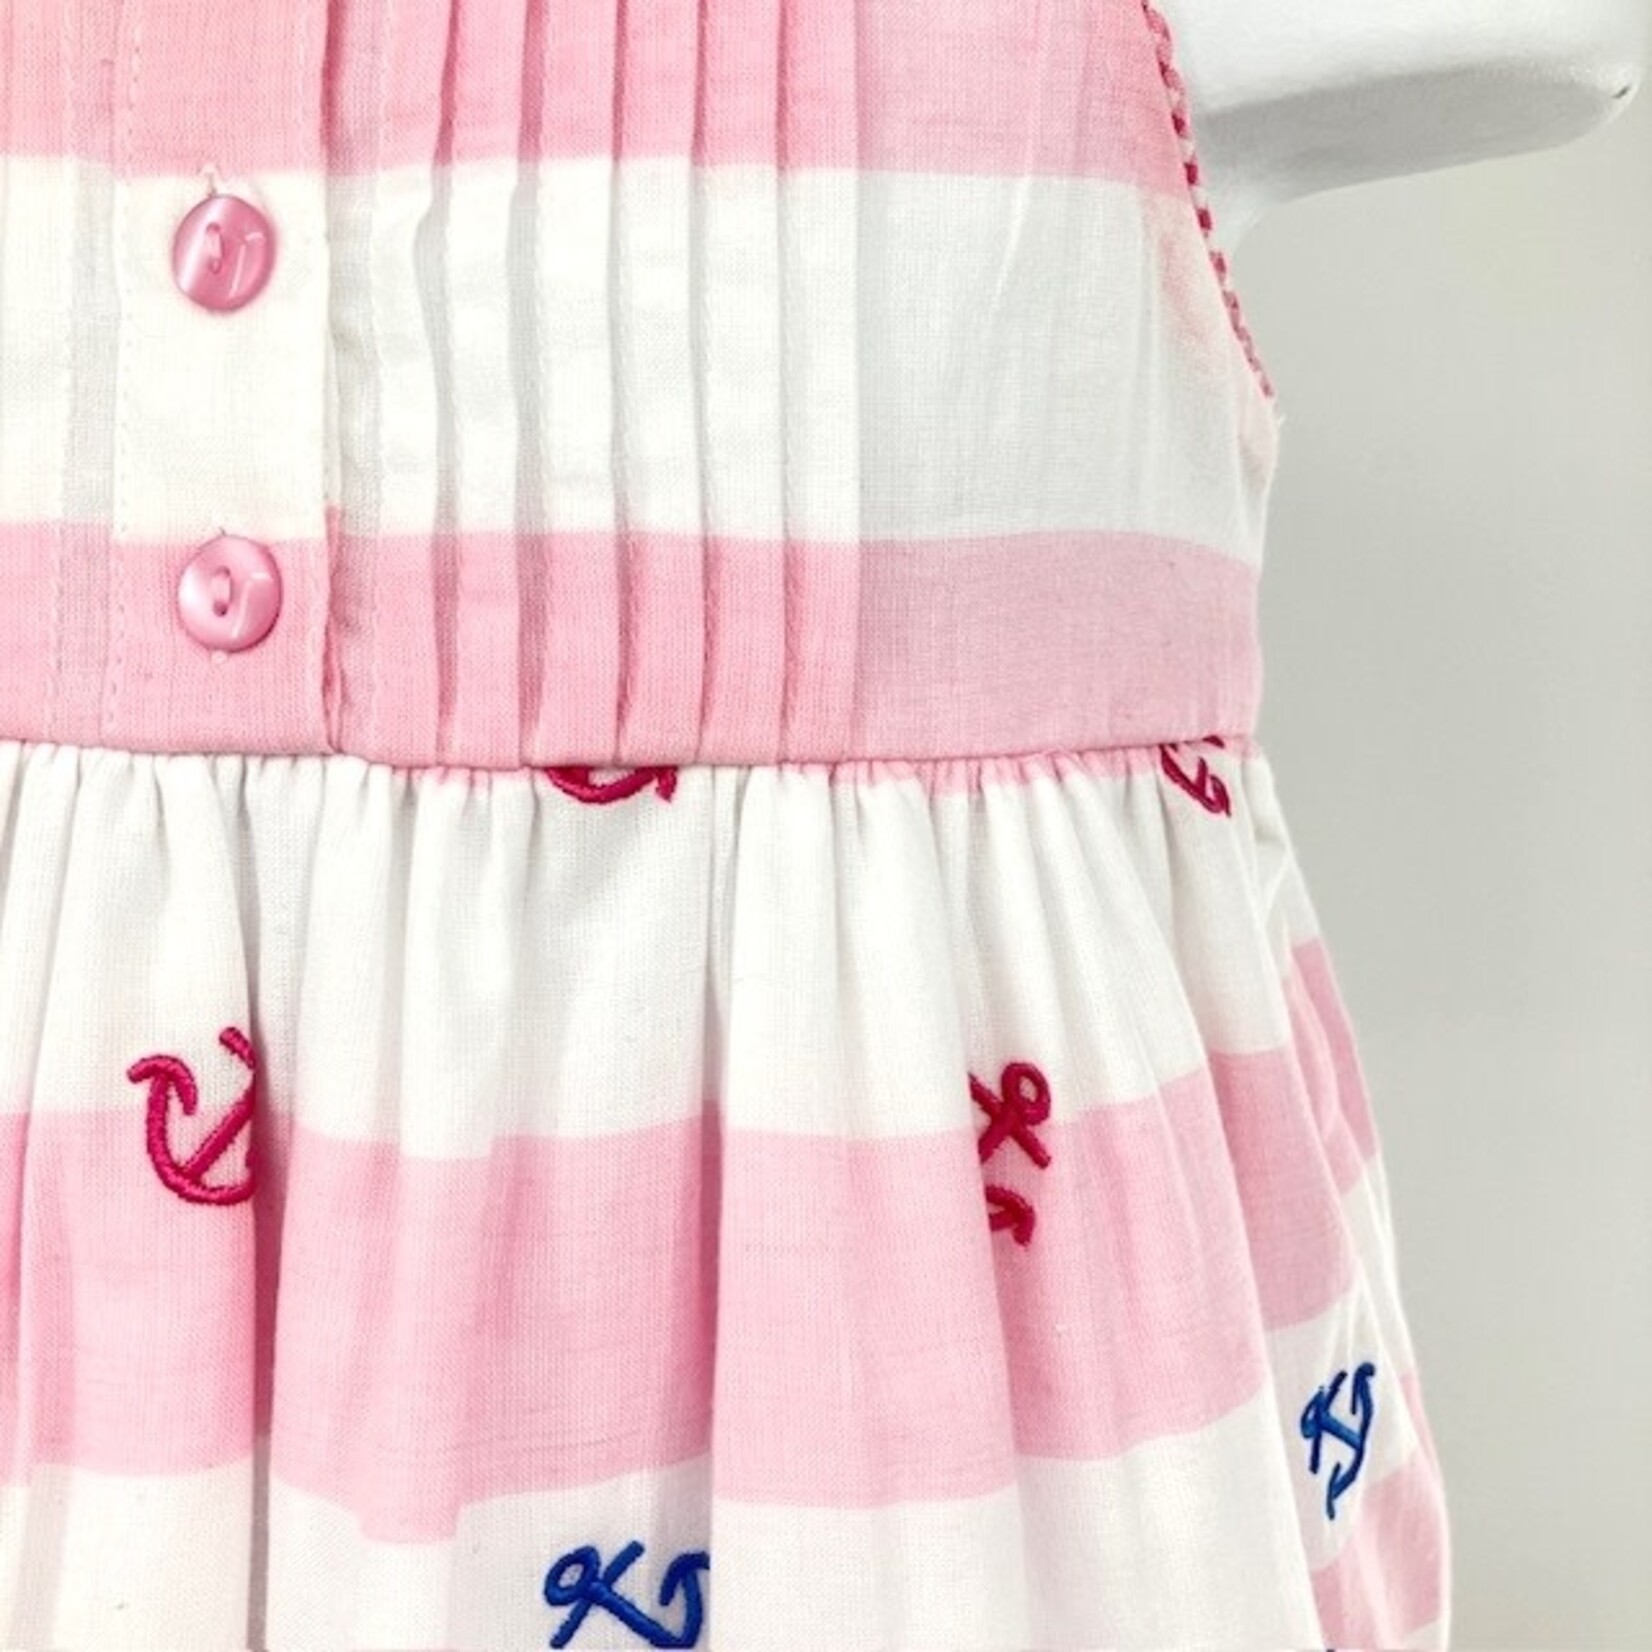 COTTON KIDS Striped Embroidered Anchor Dress